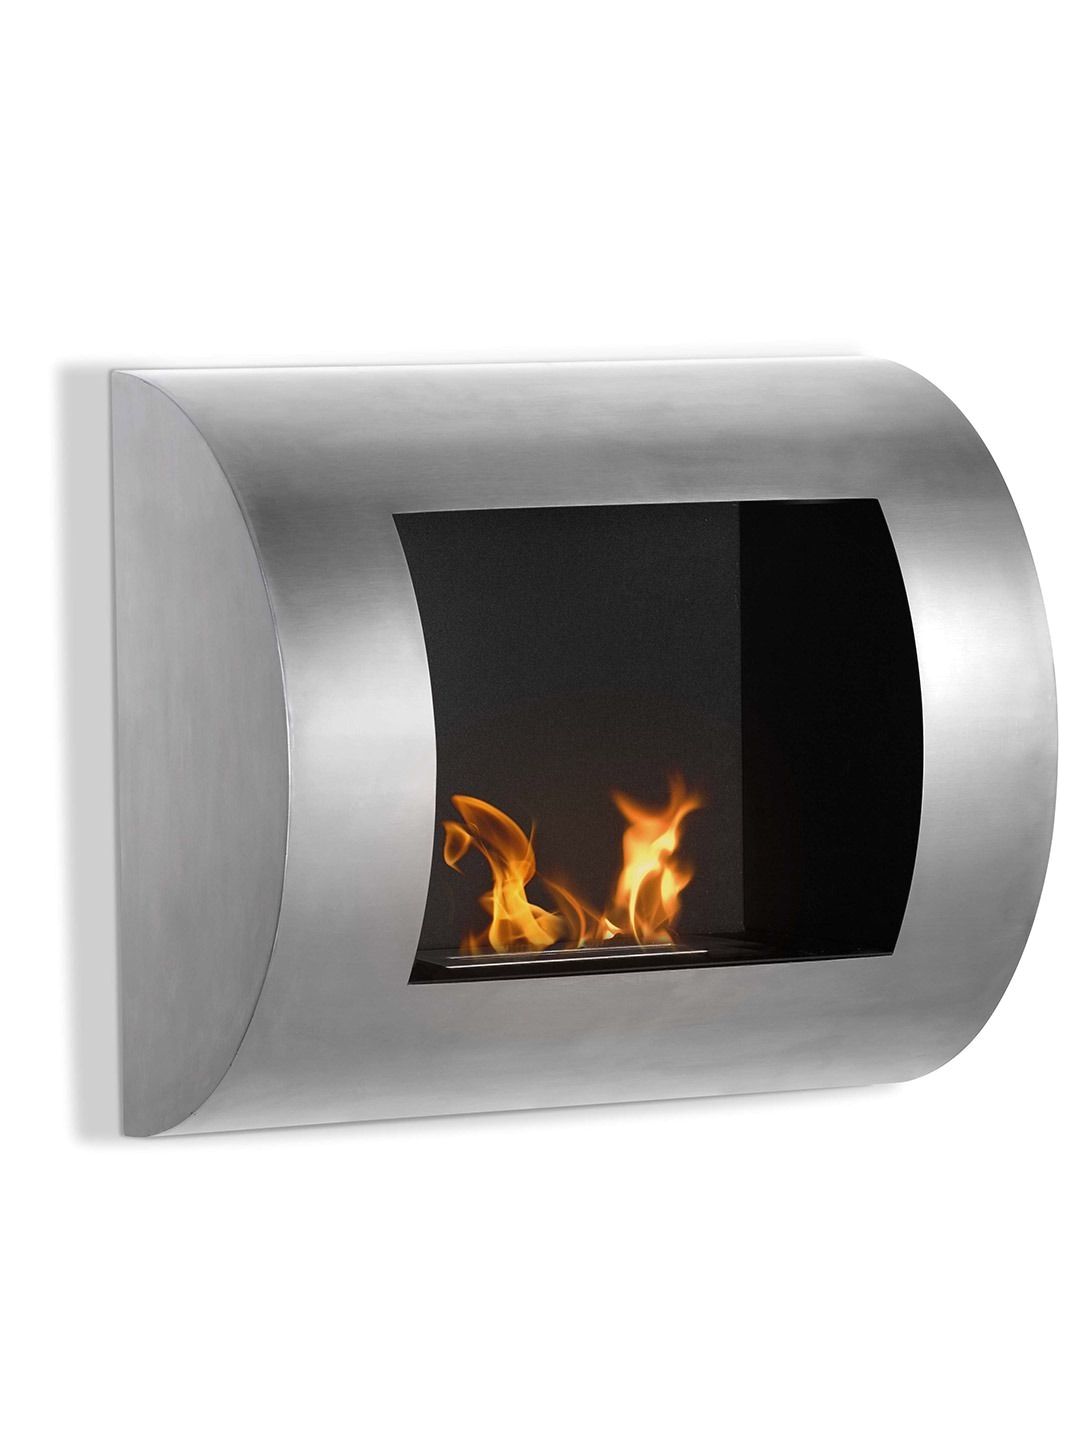 ignis luna wall mount ventless ethanol fireplace as shown